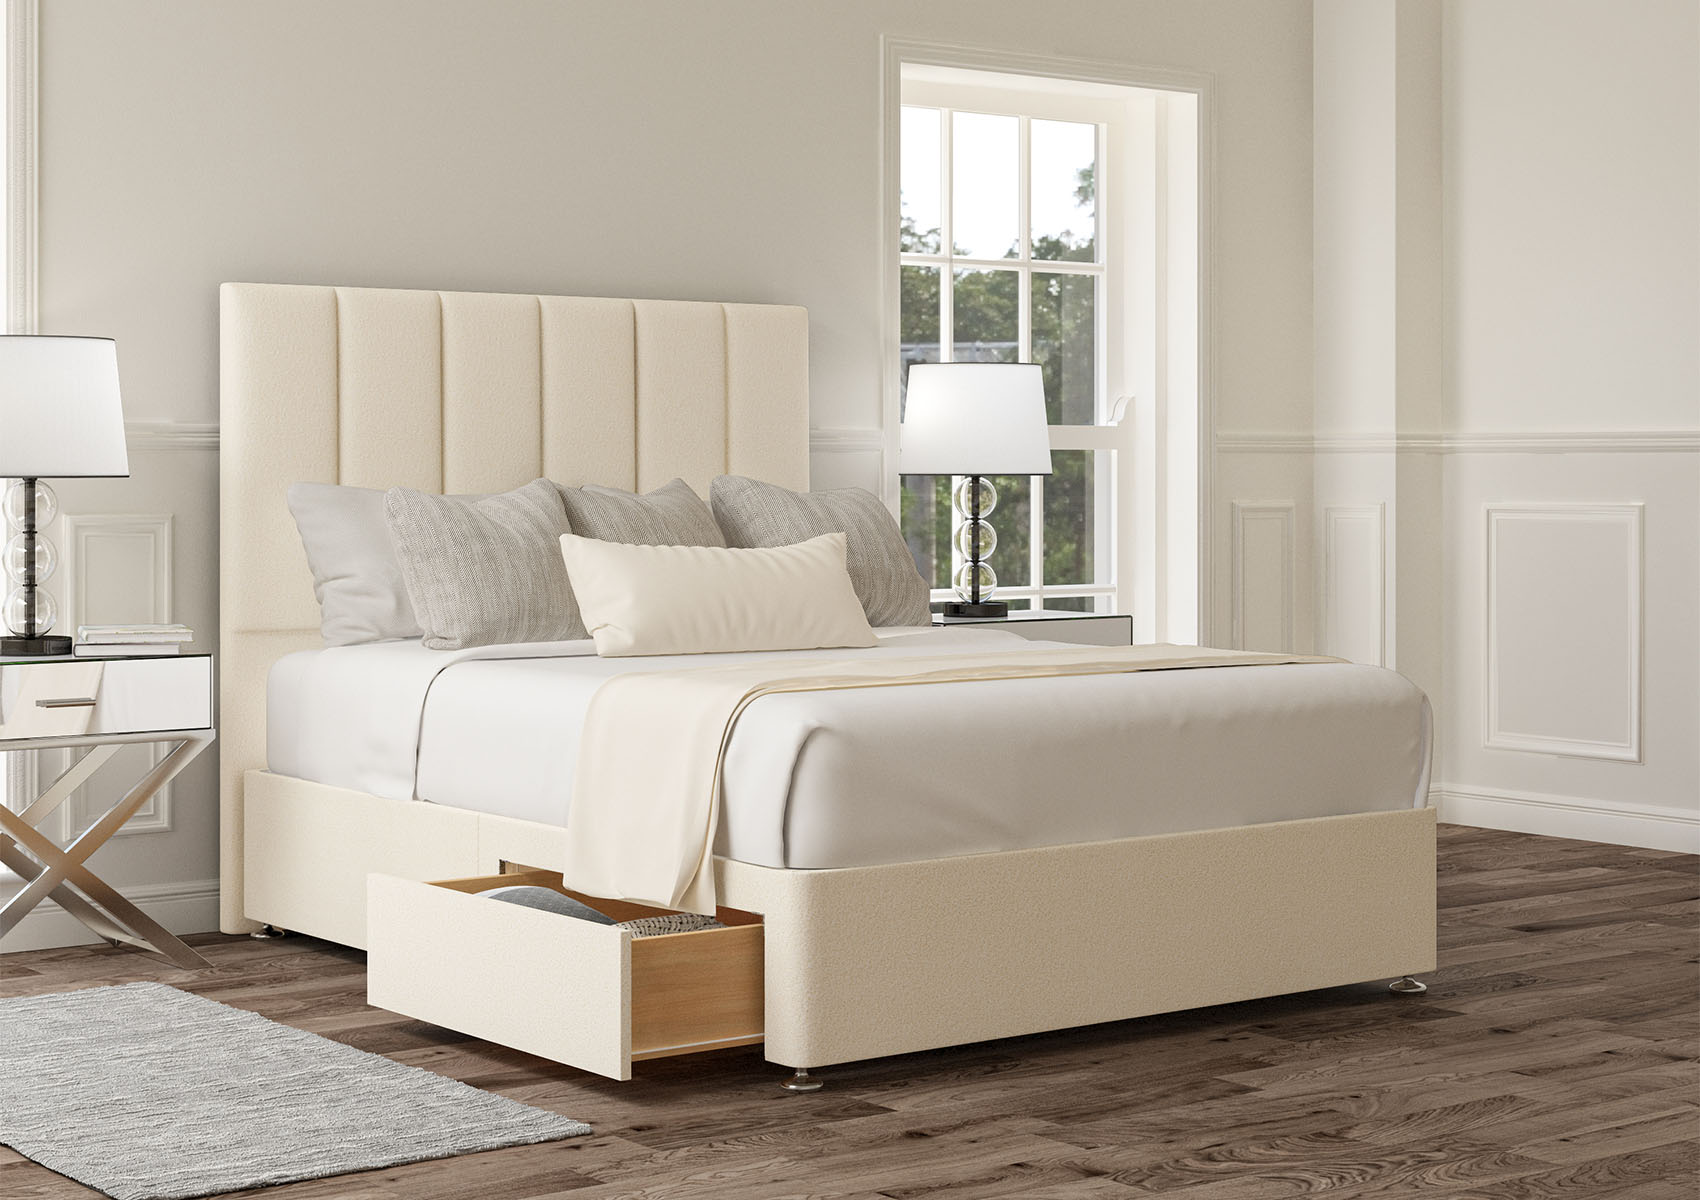 View Empire Arlington Candyfloss Upholstered King Size Divan Bed Time4Sleep information